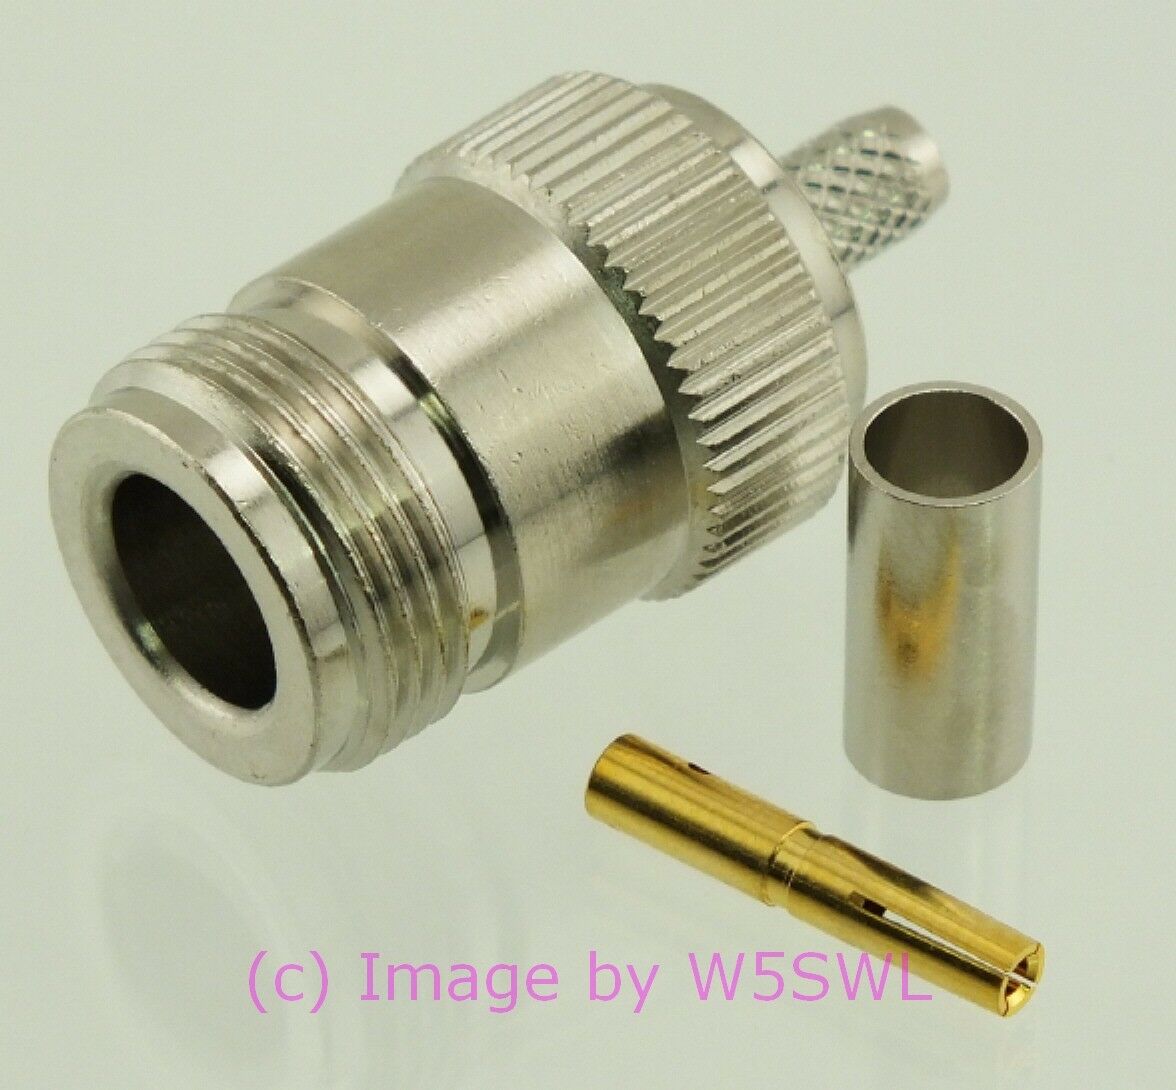 W5SWL N Female Coax Connector Crimp LMR-200 - Dave's Hobby Shop by W5SWL